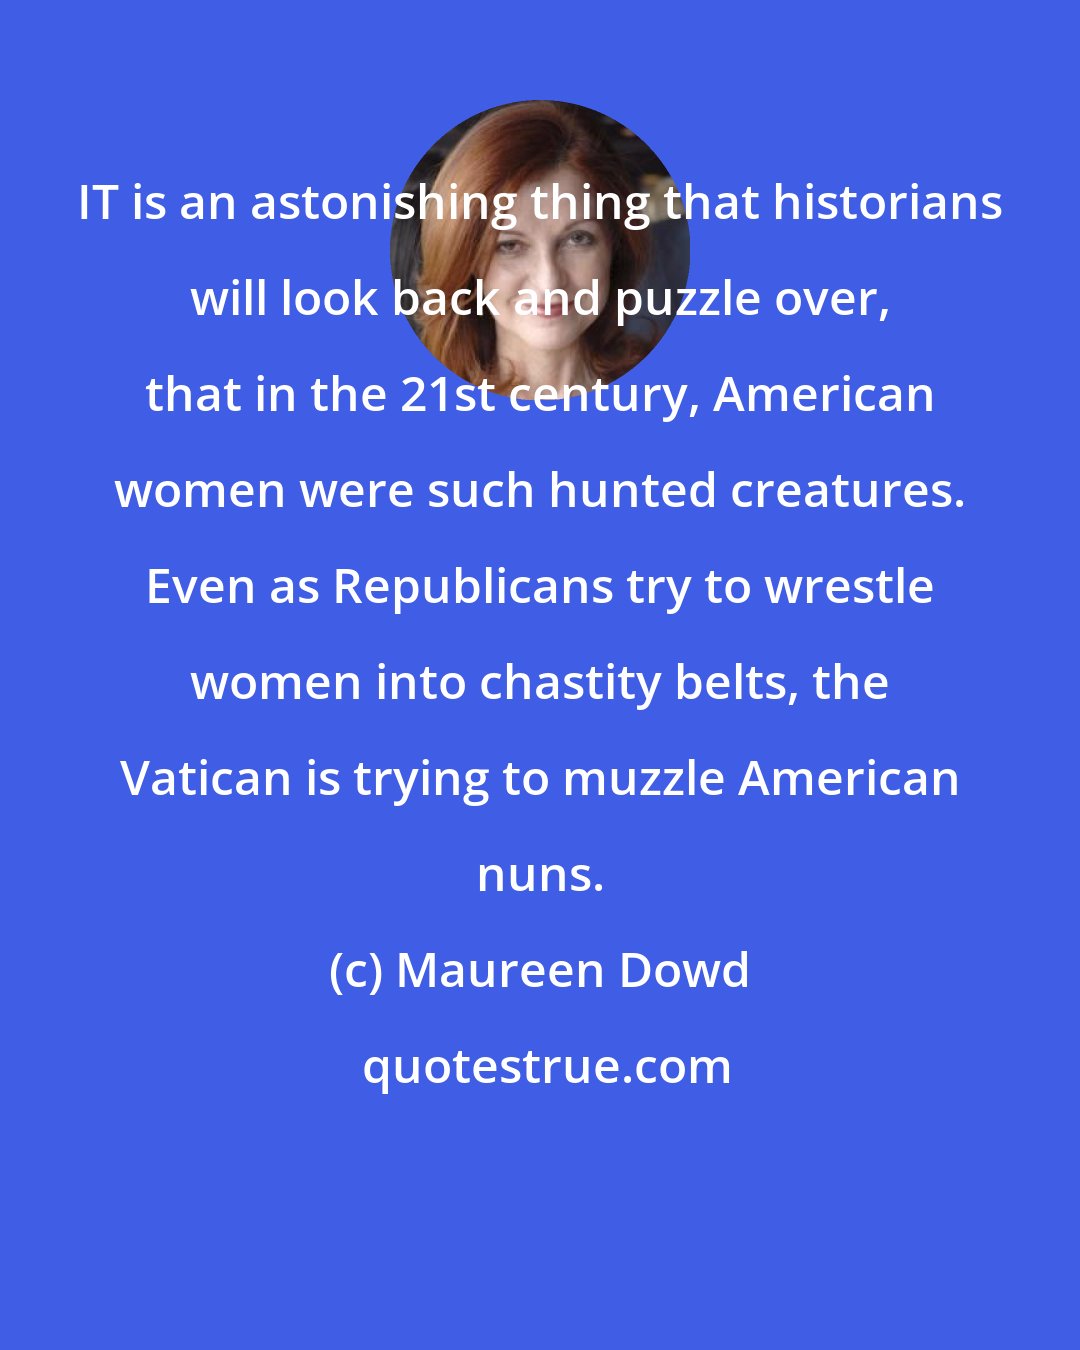 Maureen Dowd: IT is an astonishing thing that historians will look back and puzzle over, that in the 21st century, American women were such hunted creatures. Even as Republicans try to wrestle women into chastity belts, the Vatican is trying to muzzle American nuns.